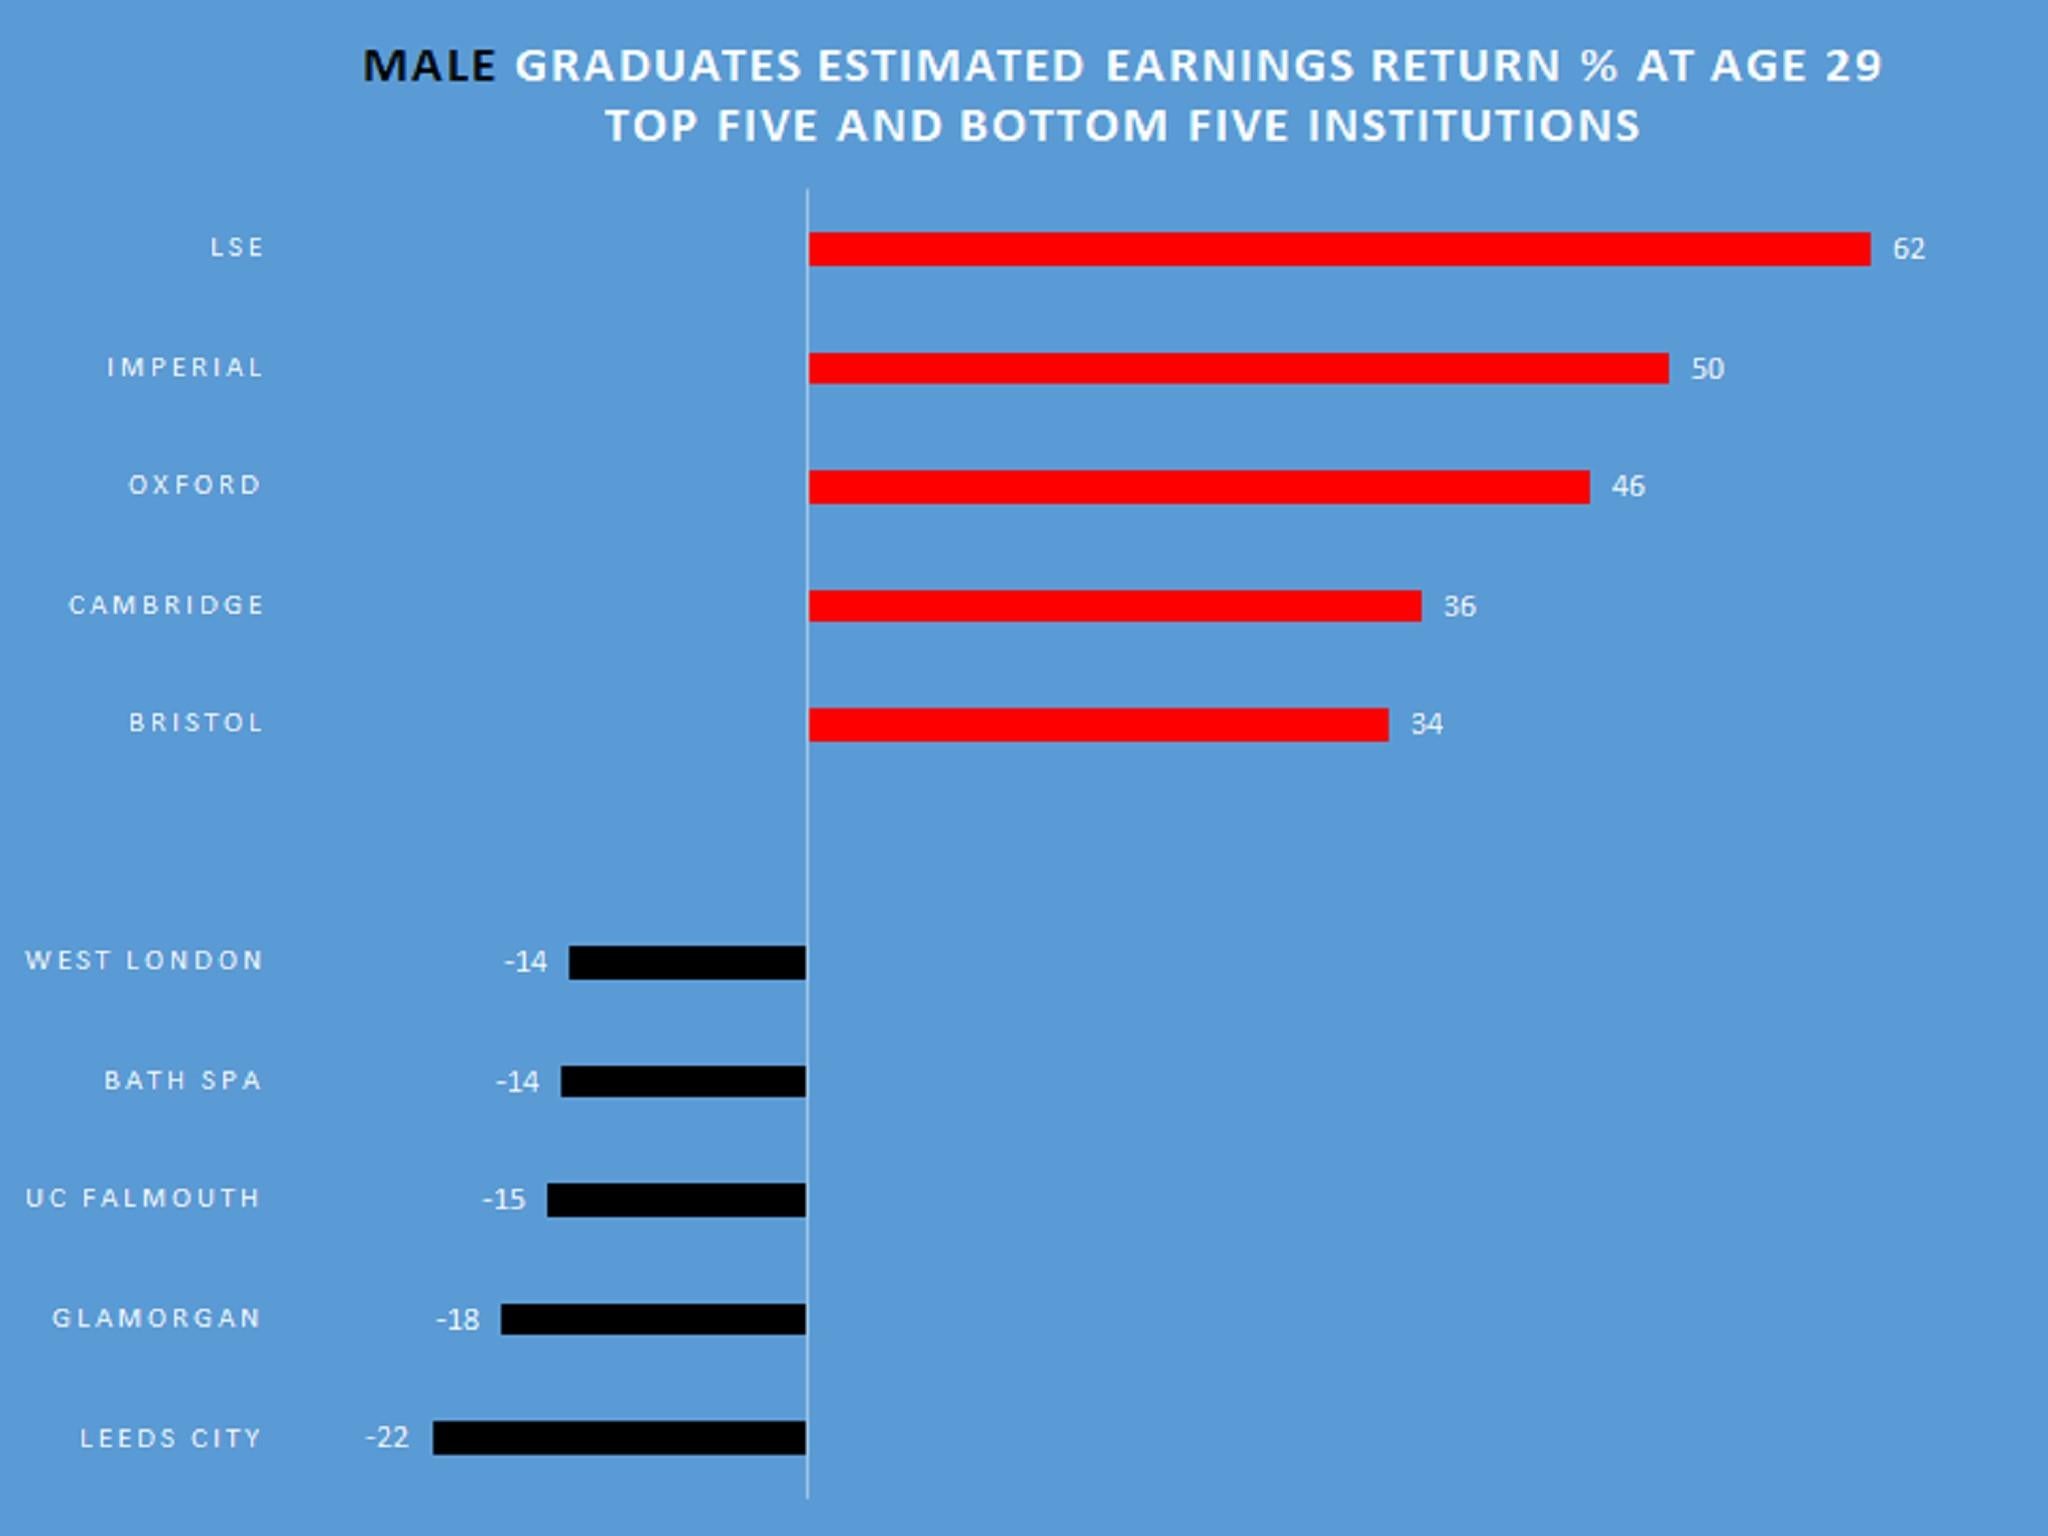 LSE is the top university for?returns for male graduates, and Leeds City is at the bottom